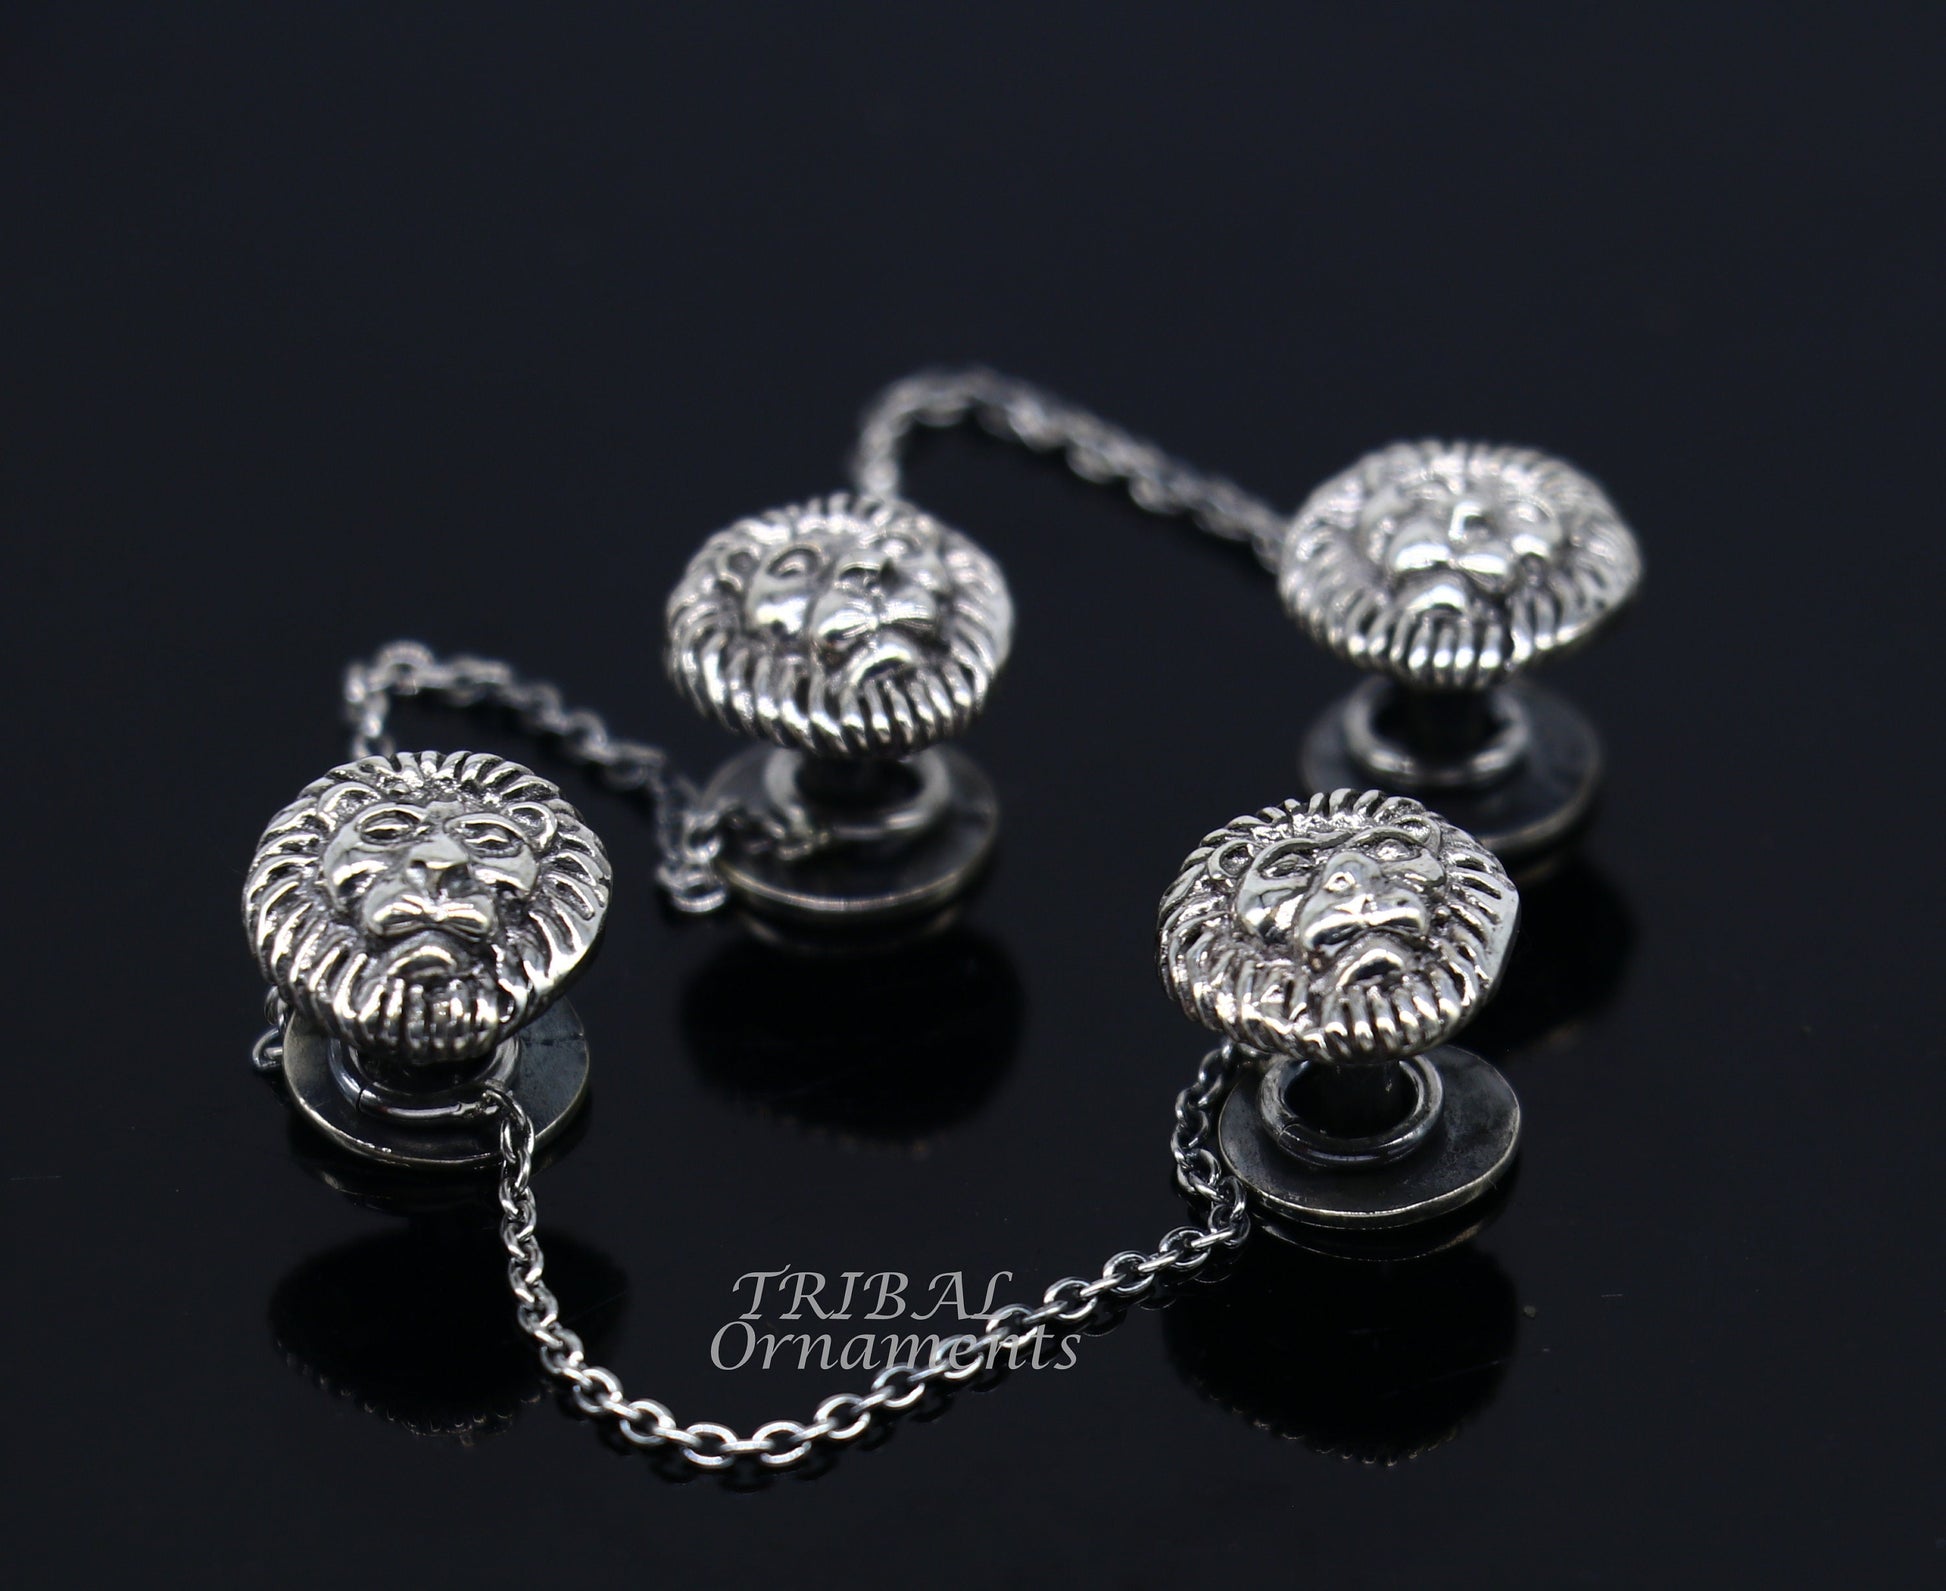 925 Sterling silver handmade gorgeous lion face design buttons or cufflinks for men's kurta, best gifting jewelry occasions btn06 - TRIBAL ORNAMENTS